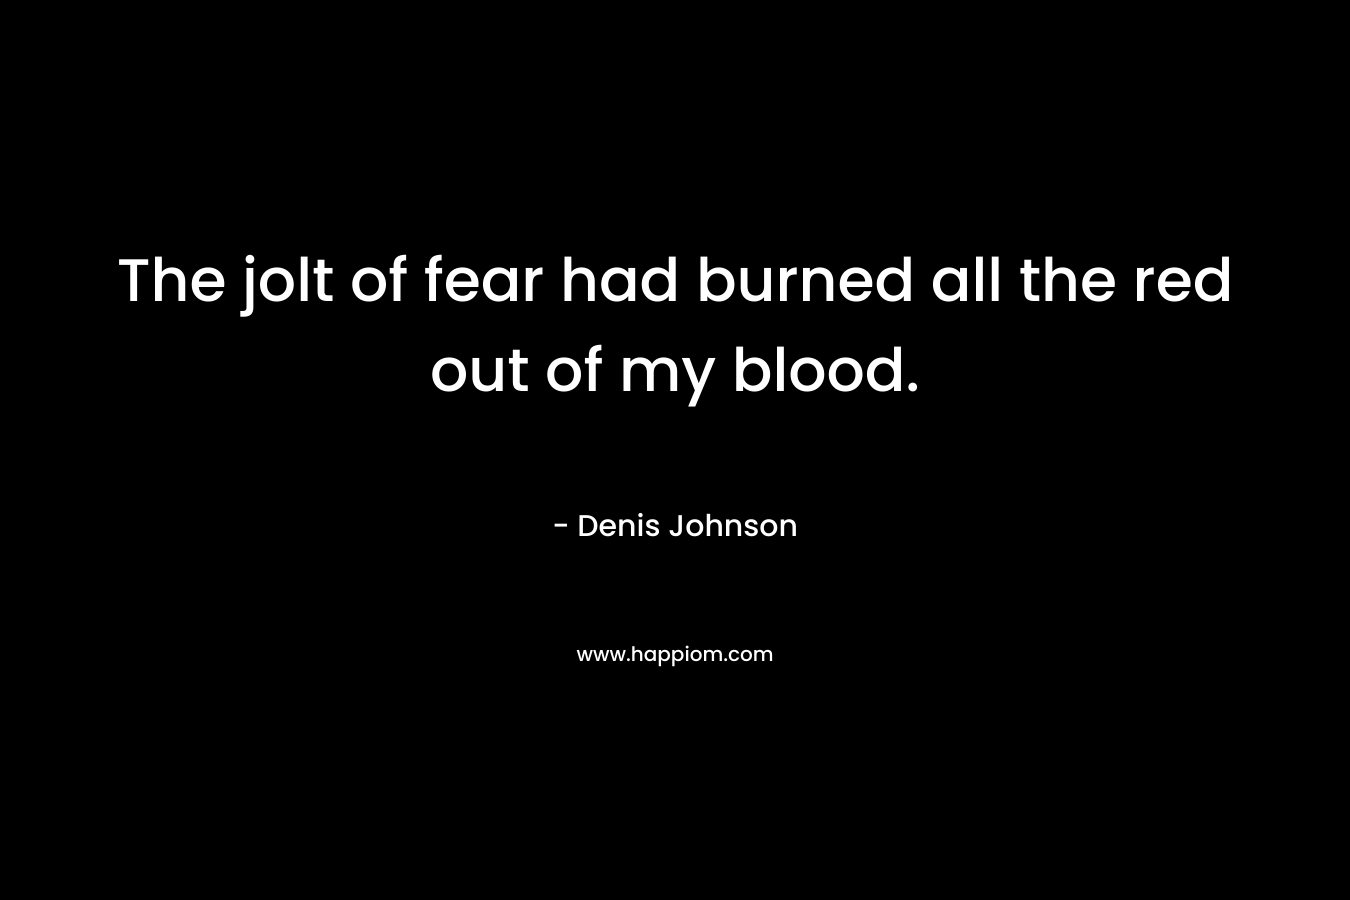 The jolt of fear had burned all the red out of my blood. – Denis Johnson